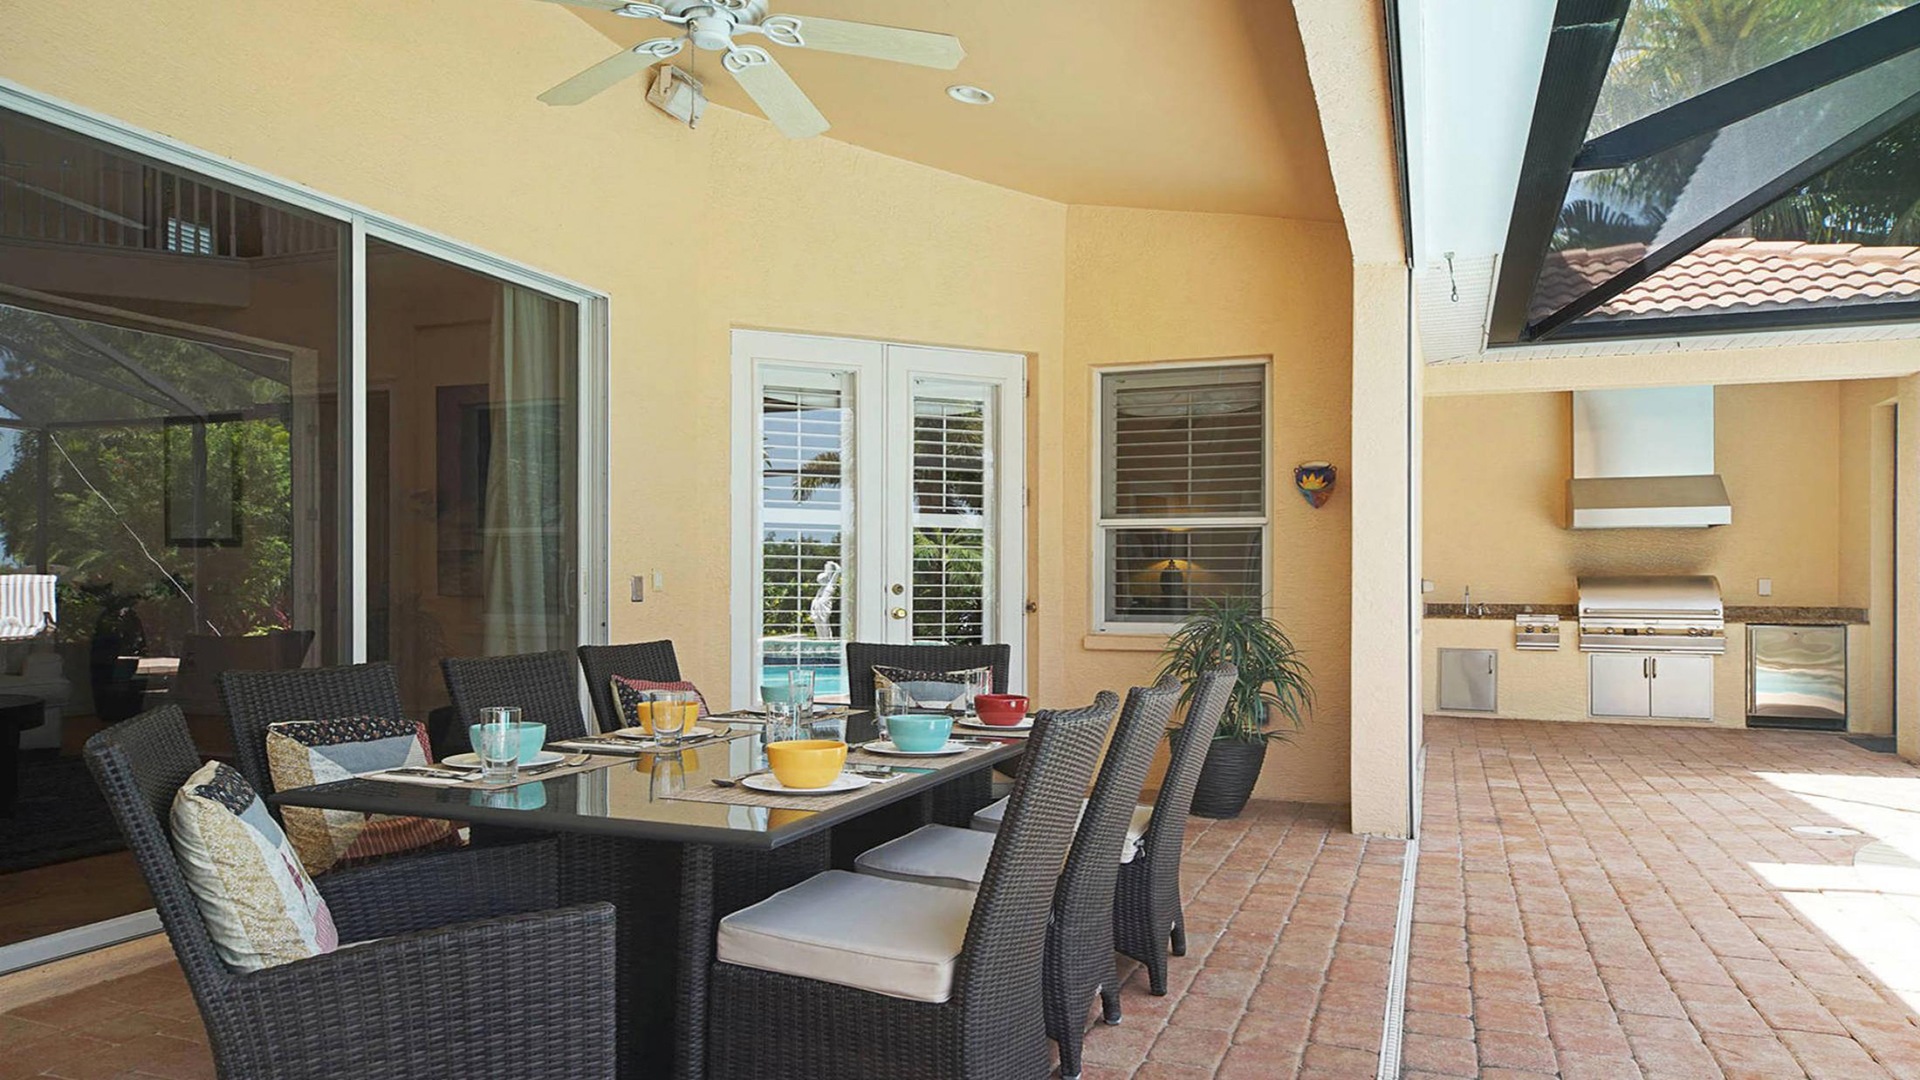 Eight guests can dine together on the patio